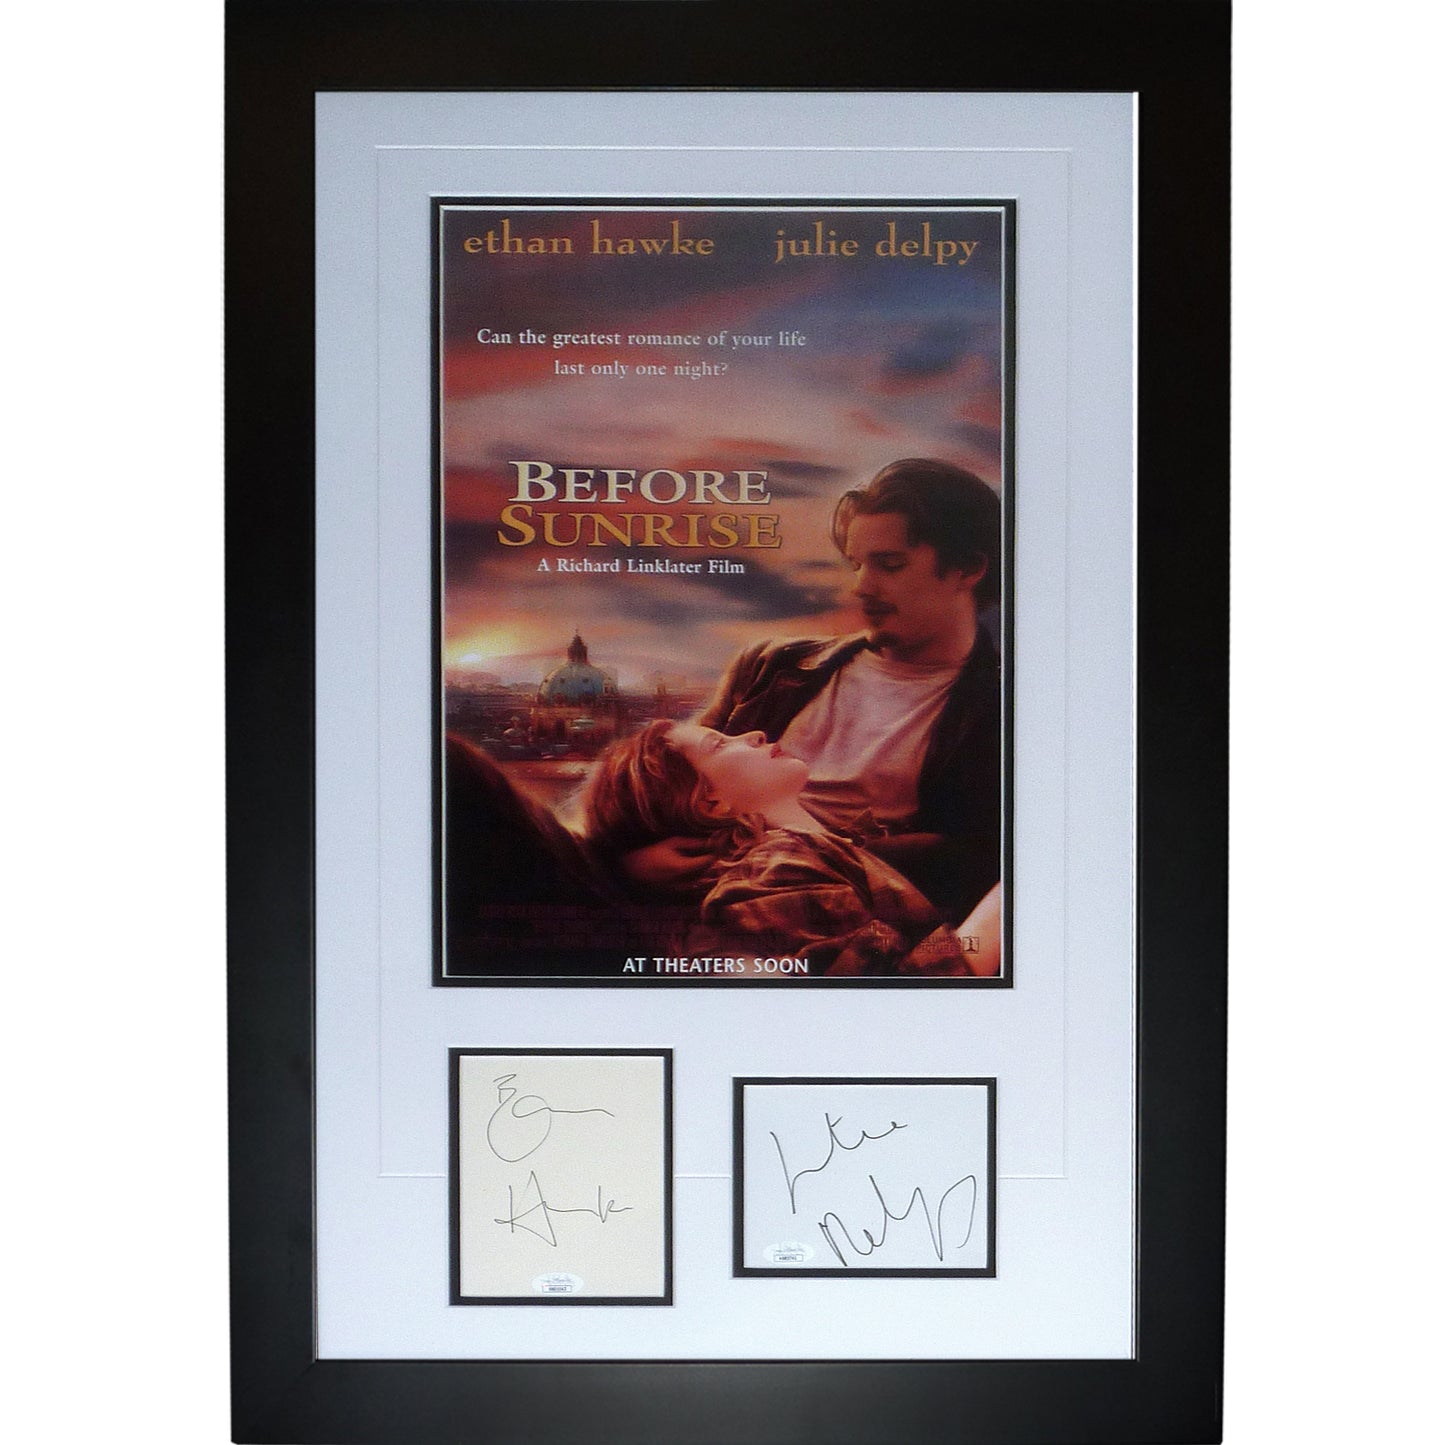 Before Sunrise Movie Poster Deluxe Framed with Ethan Hawke And Julie Delpy Autographs - JSA